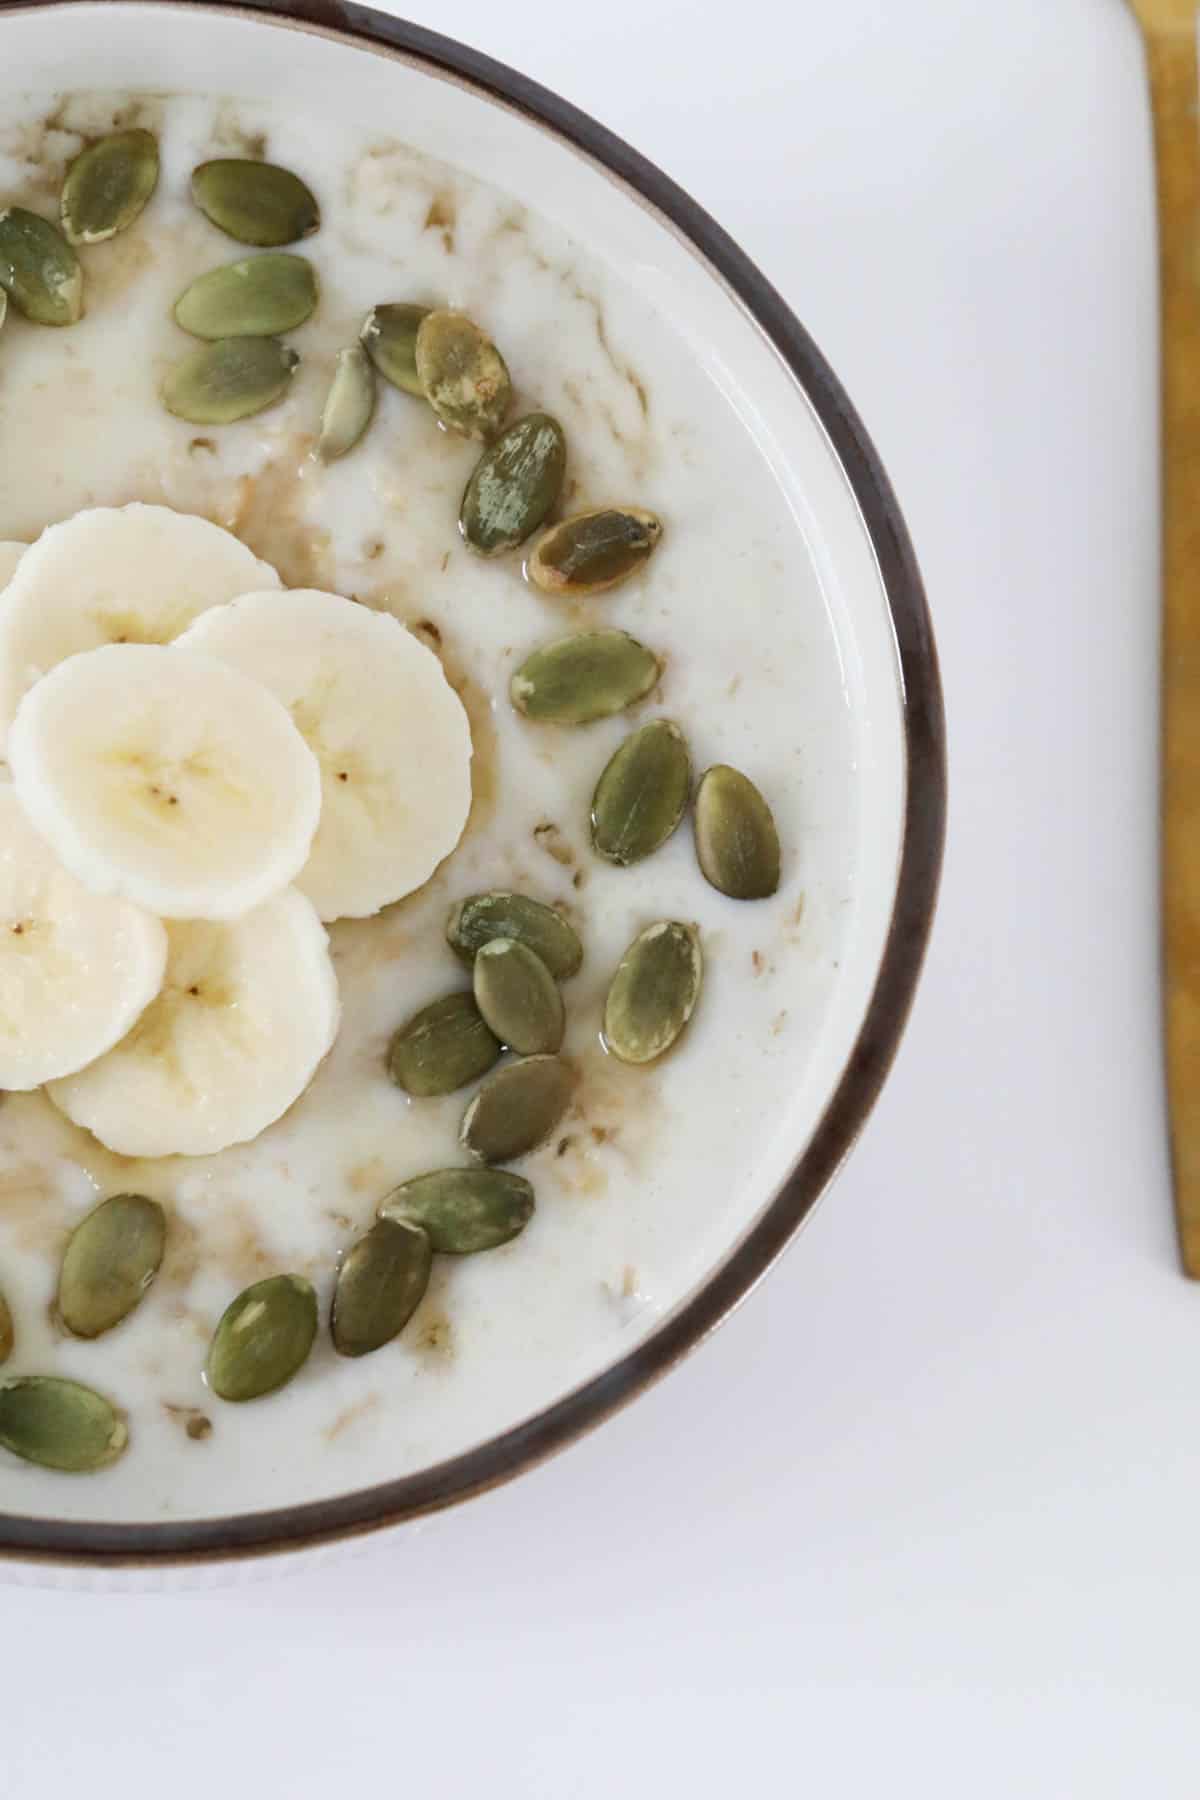 Cooked oats with seeds and banana.